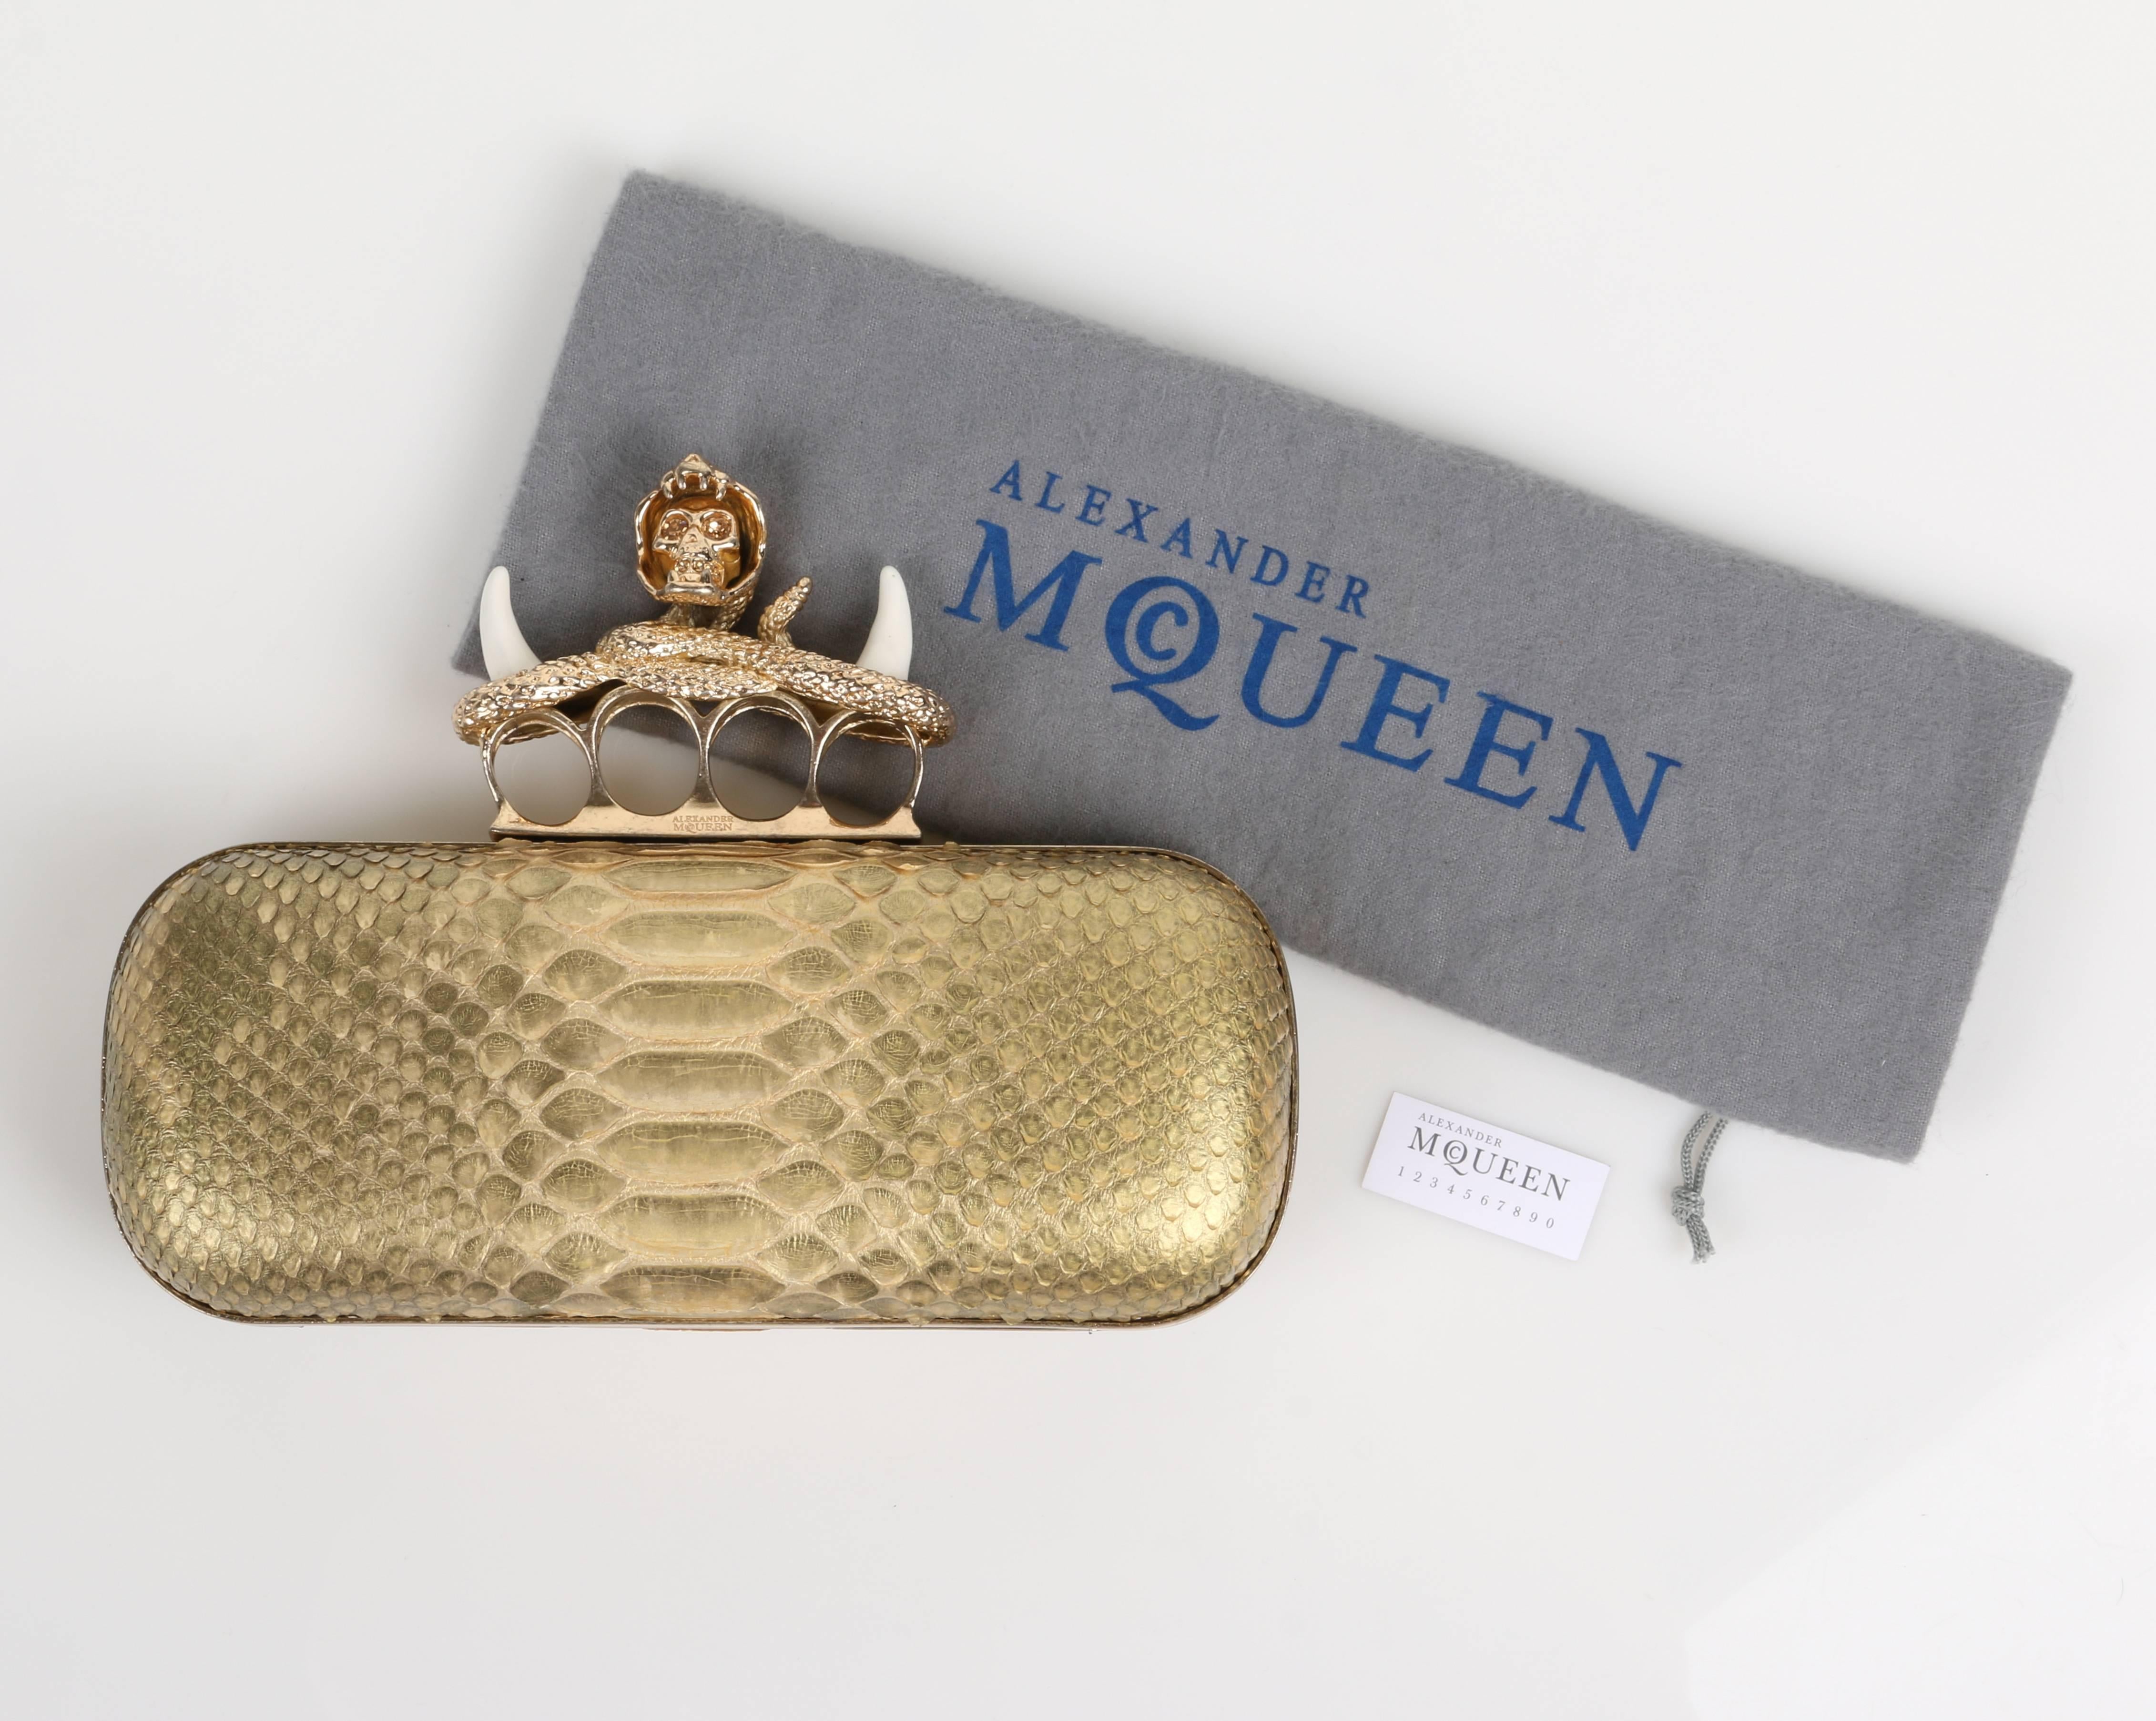 Alexander McQueen c.2012 gold genuine python knuckle-duster clutch. Distressed gold-tone hardware. Signature hinged clasp with four "rings" embellished with rhinestone detail featuring a snake, skull, and enamel fangs. Framed rectangular